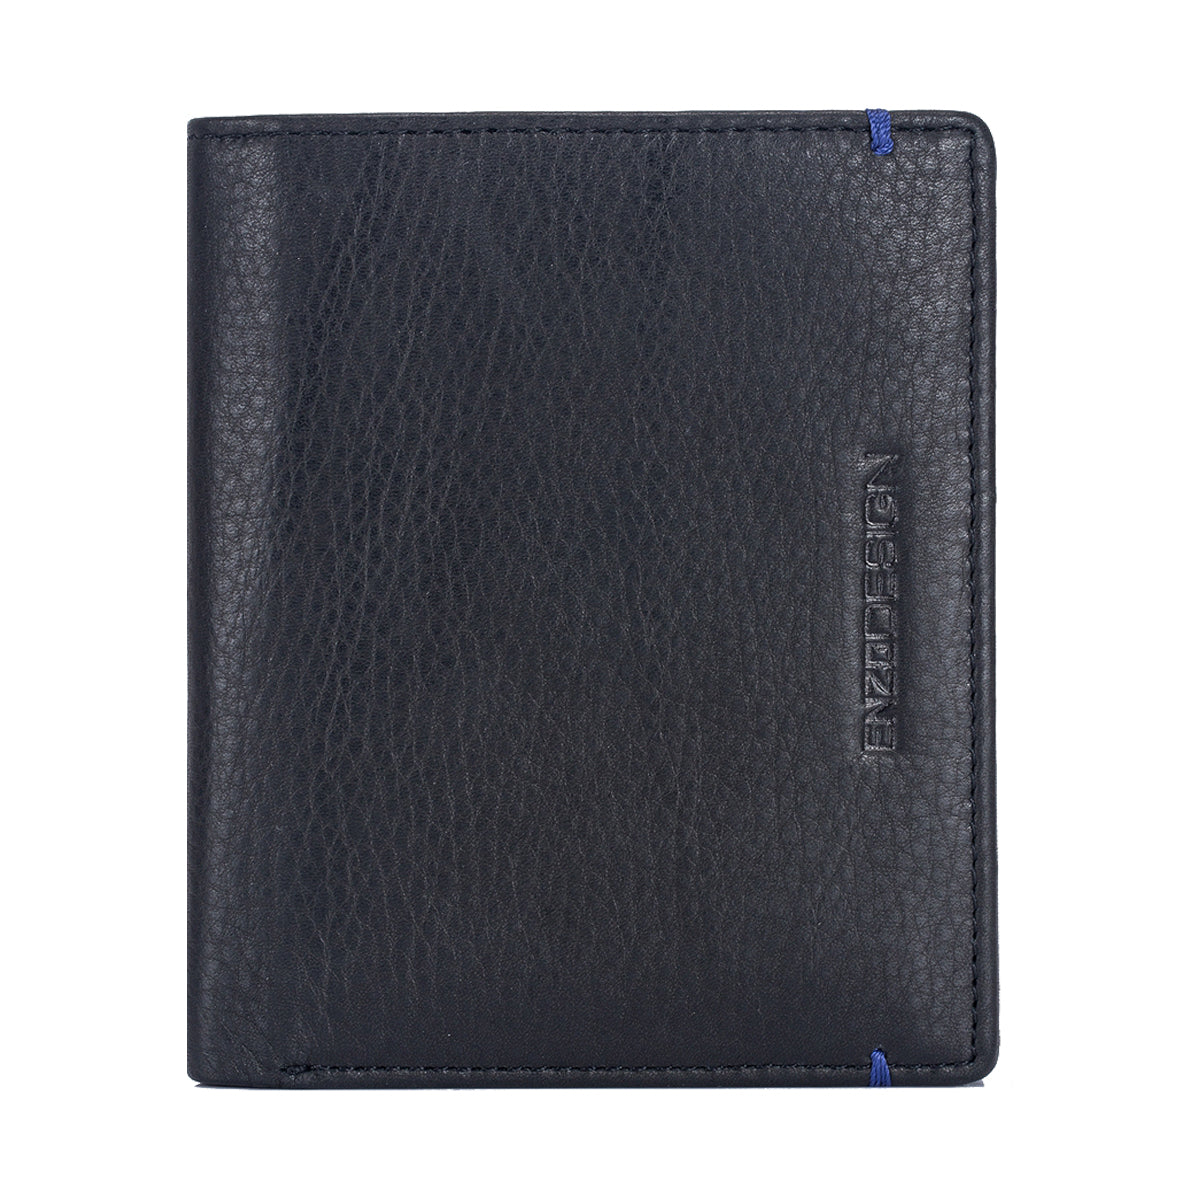 EnzoDesign Cowhide Leather Wallet 